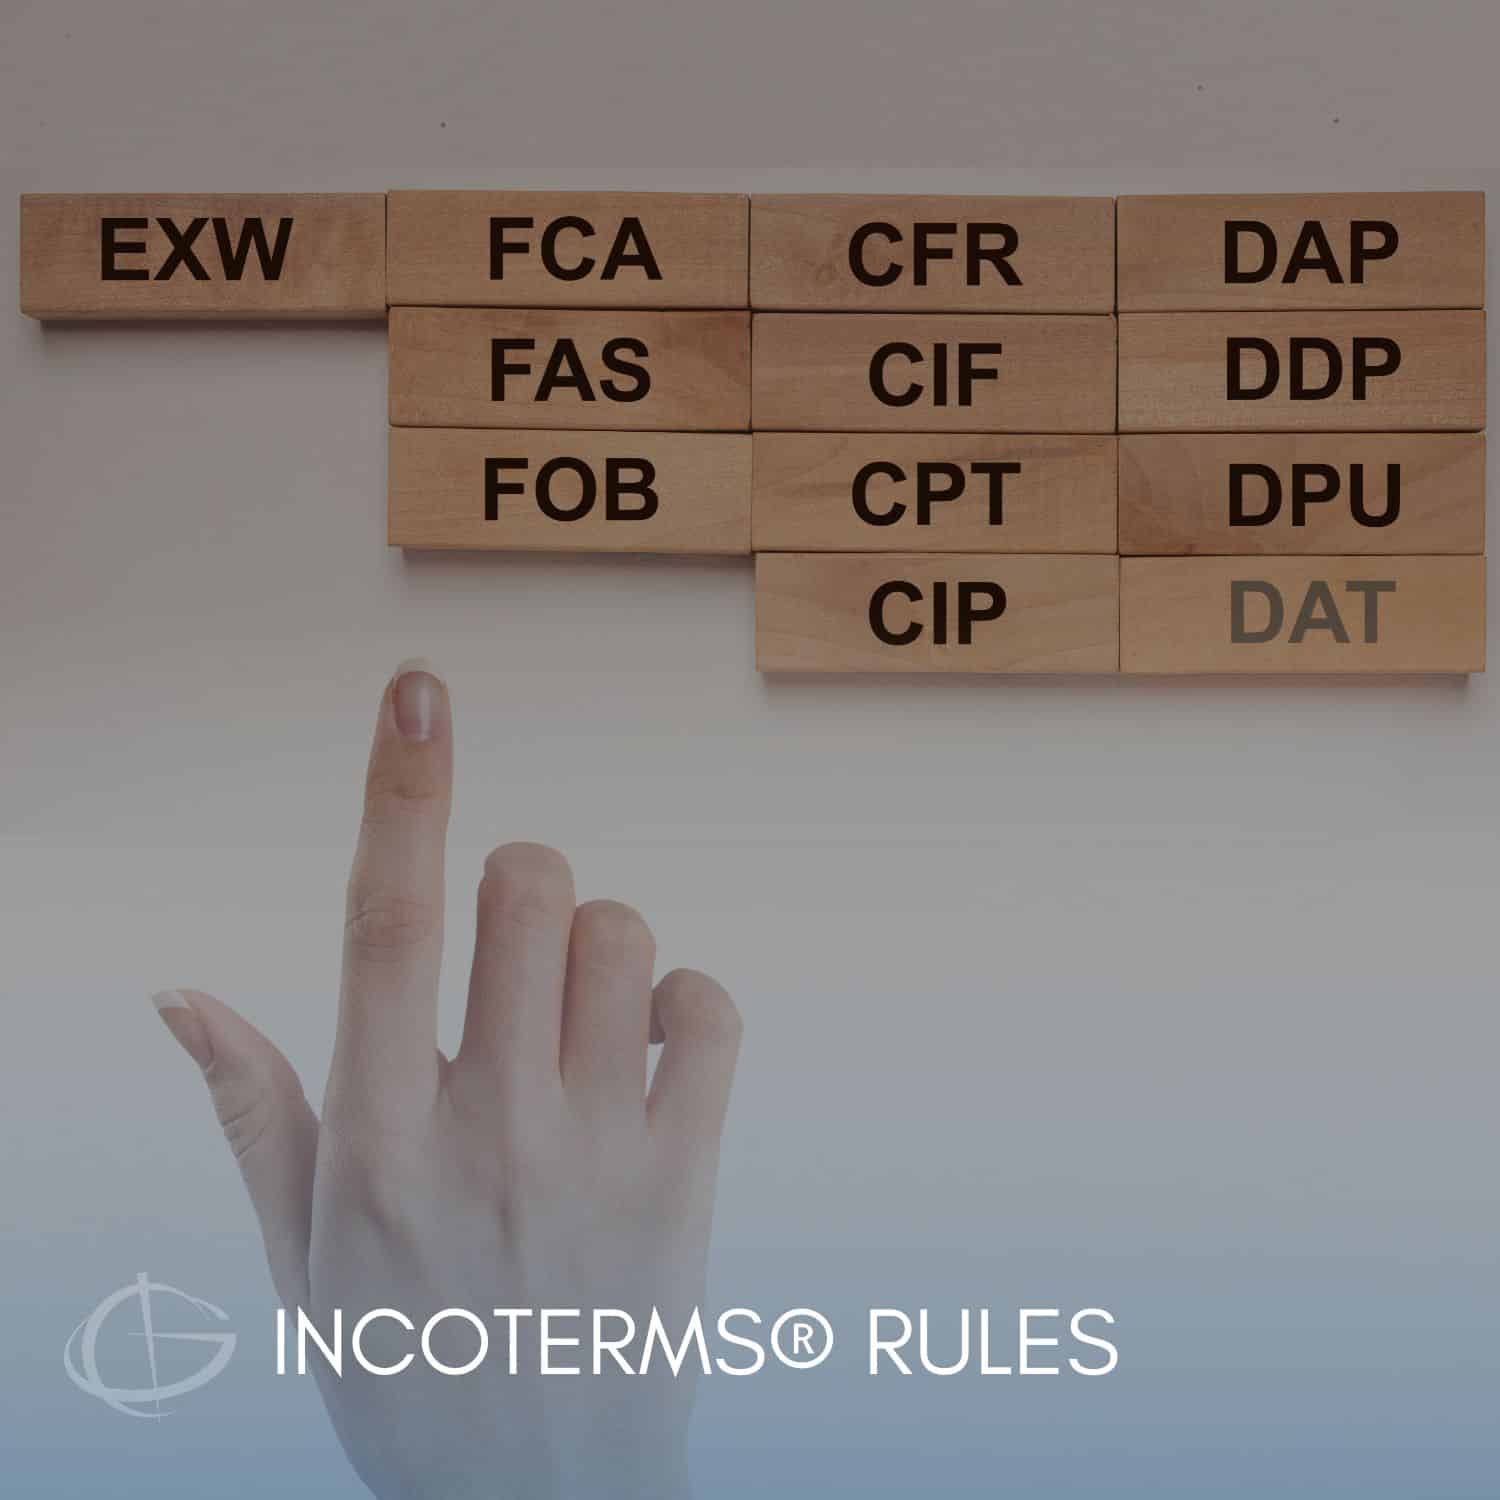 Incoterms Rules Training Course: Learn the risks and obligations associated with the Incoterms your company uses. Sign up today!